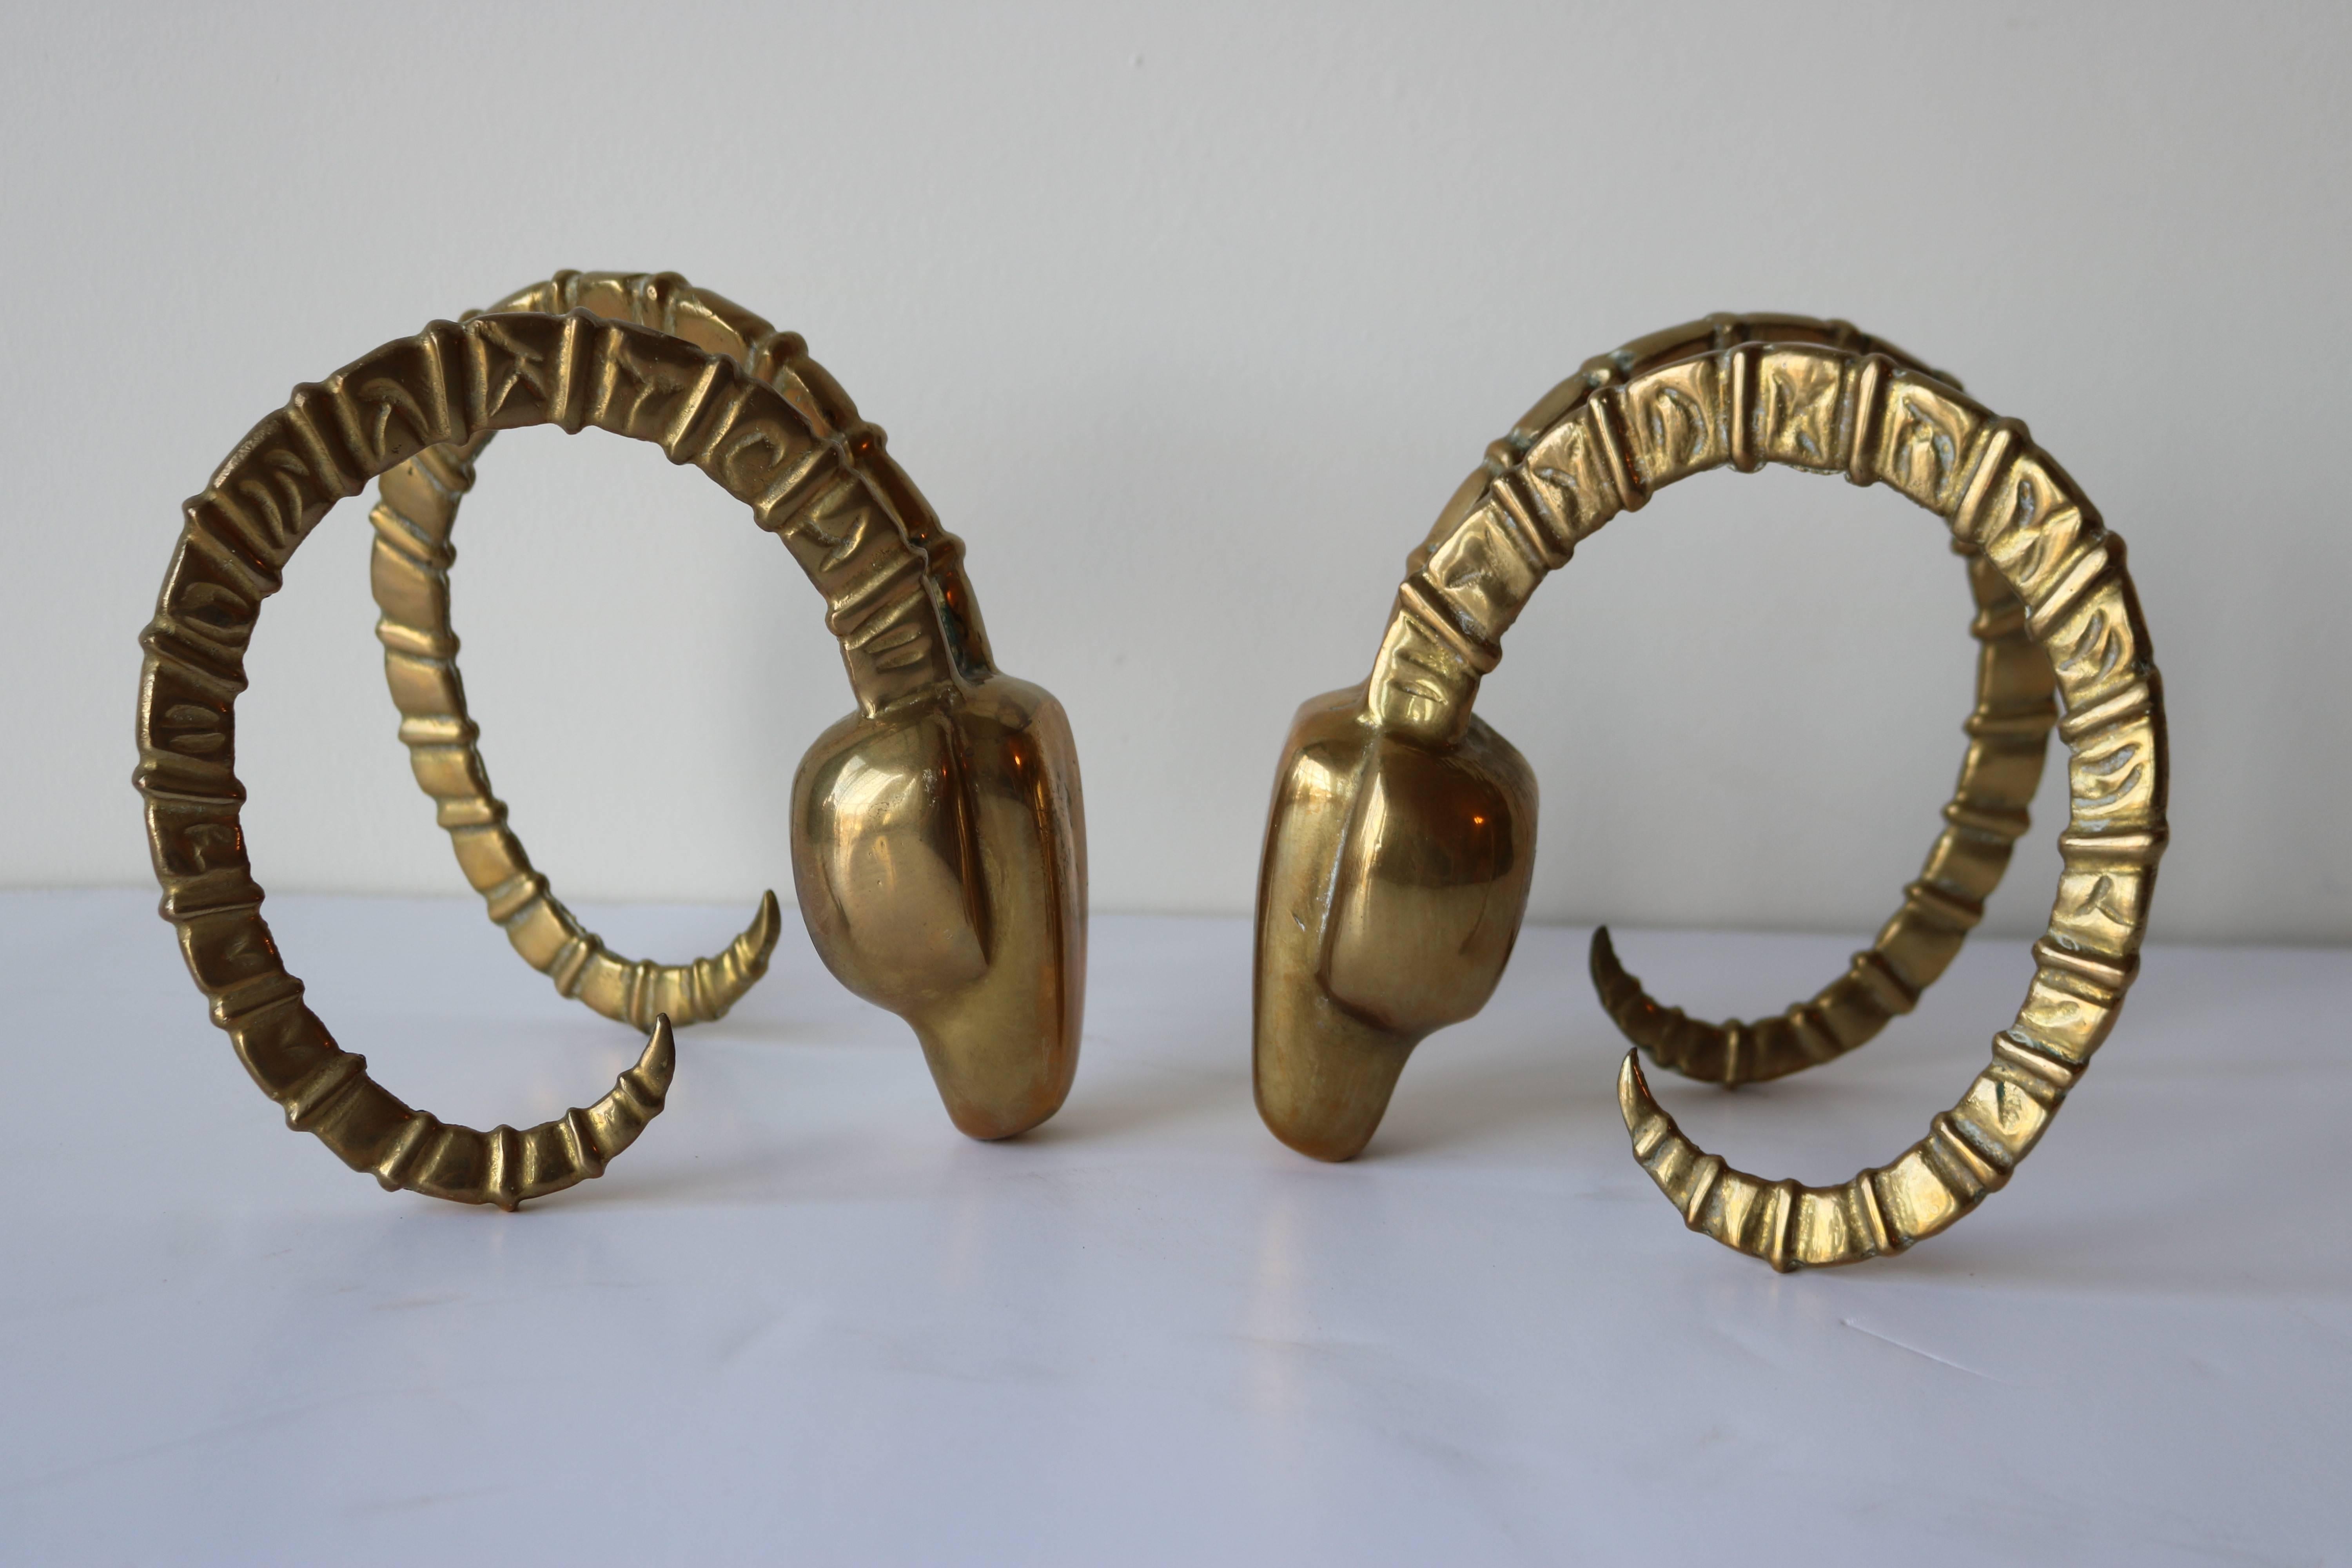 These are so glamorous and chic! These heavy, solid brass bookends are sure to make a statement in any room!